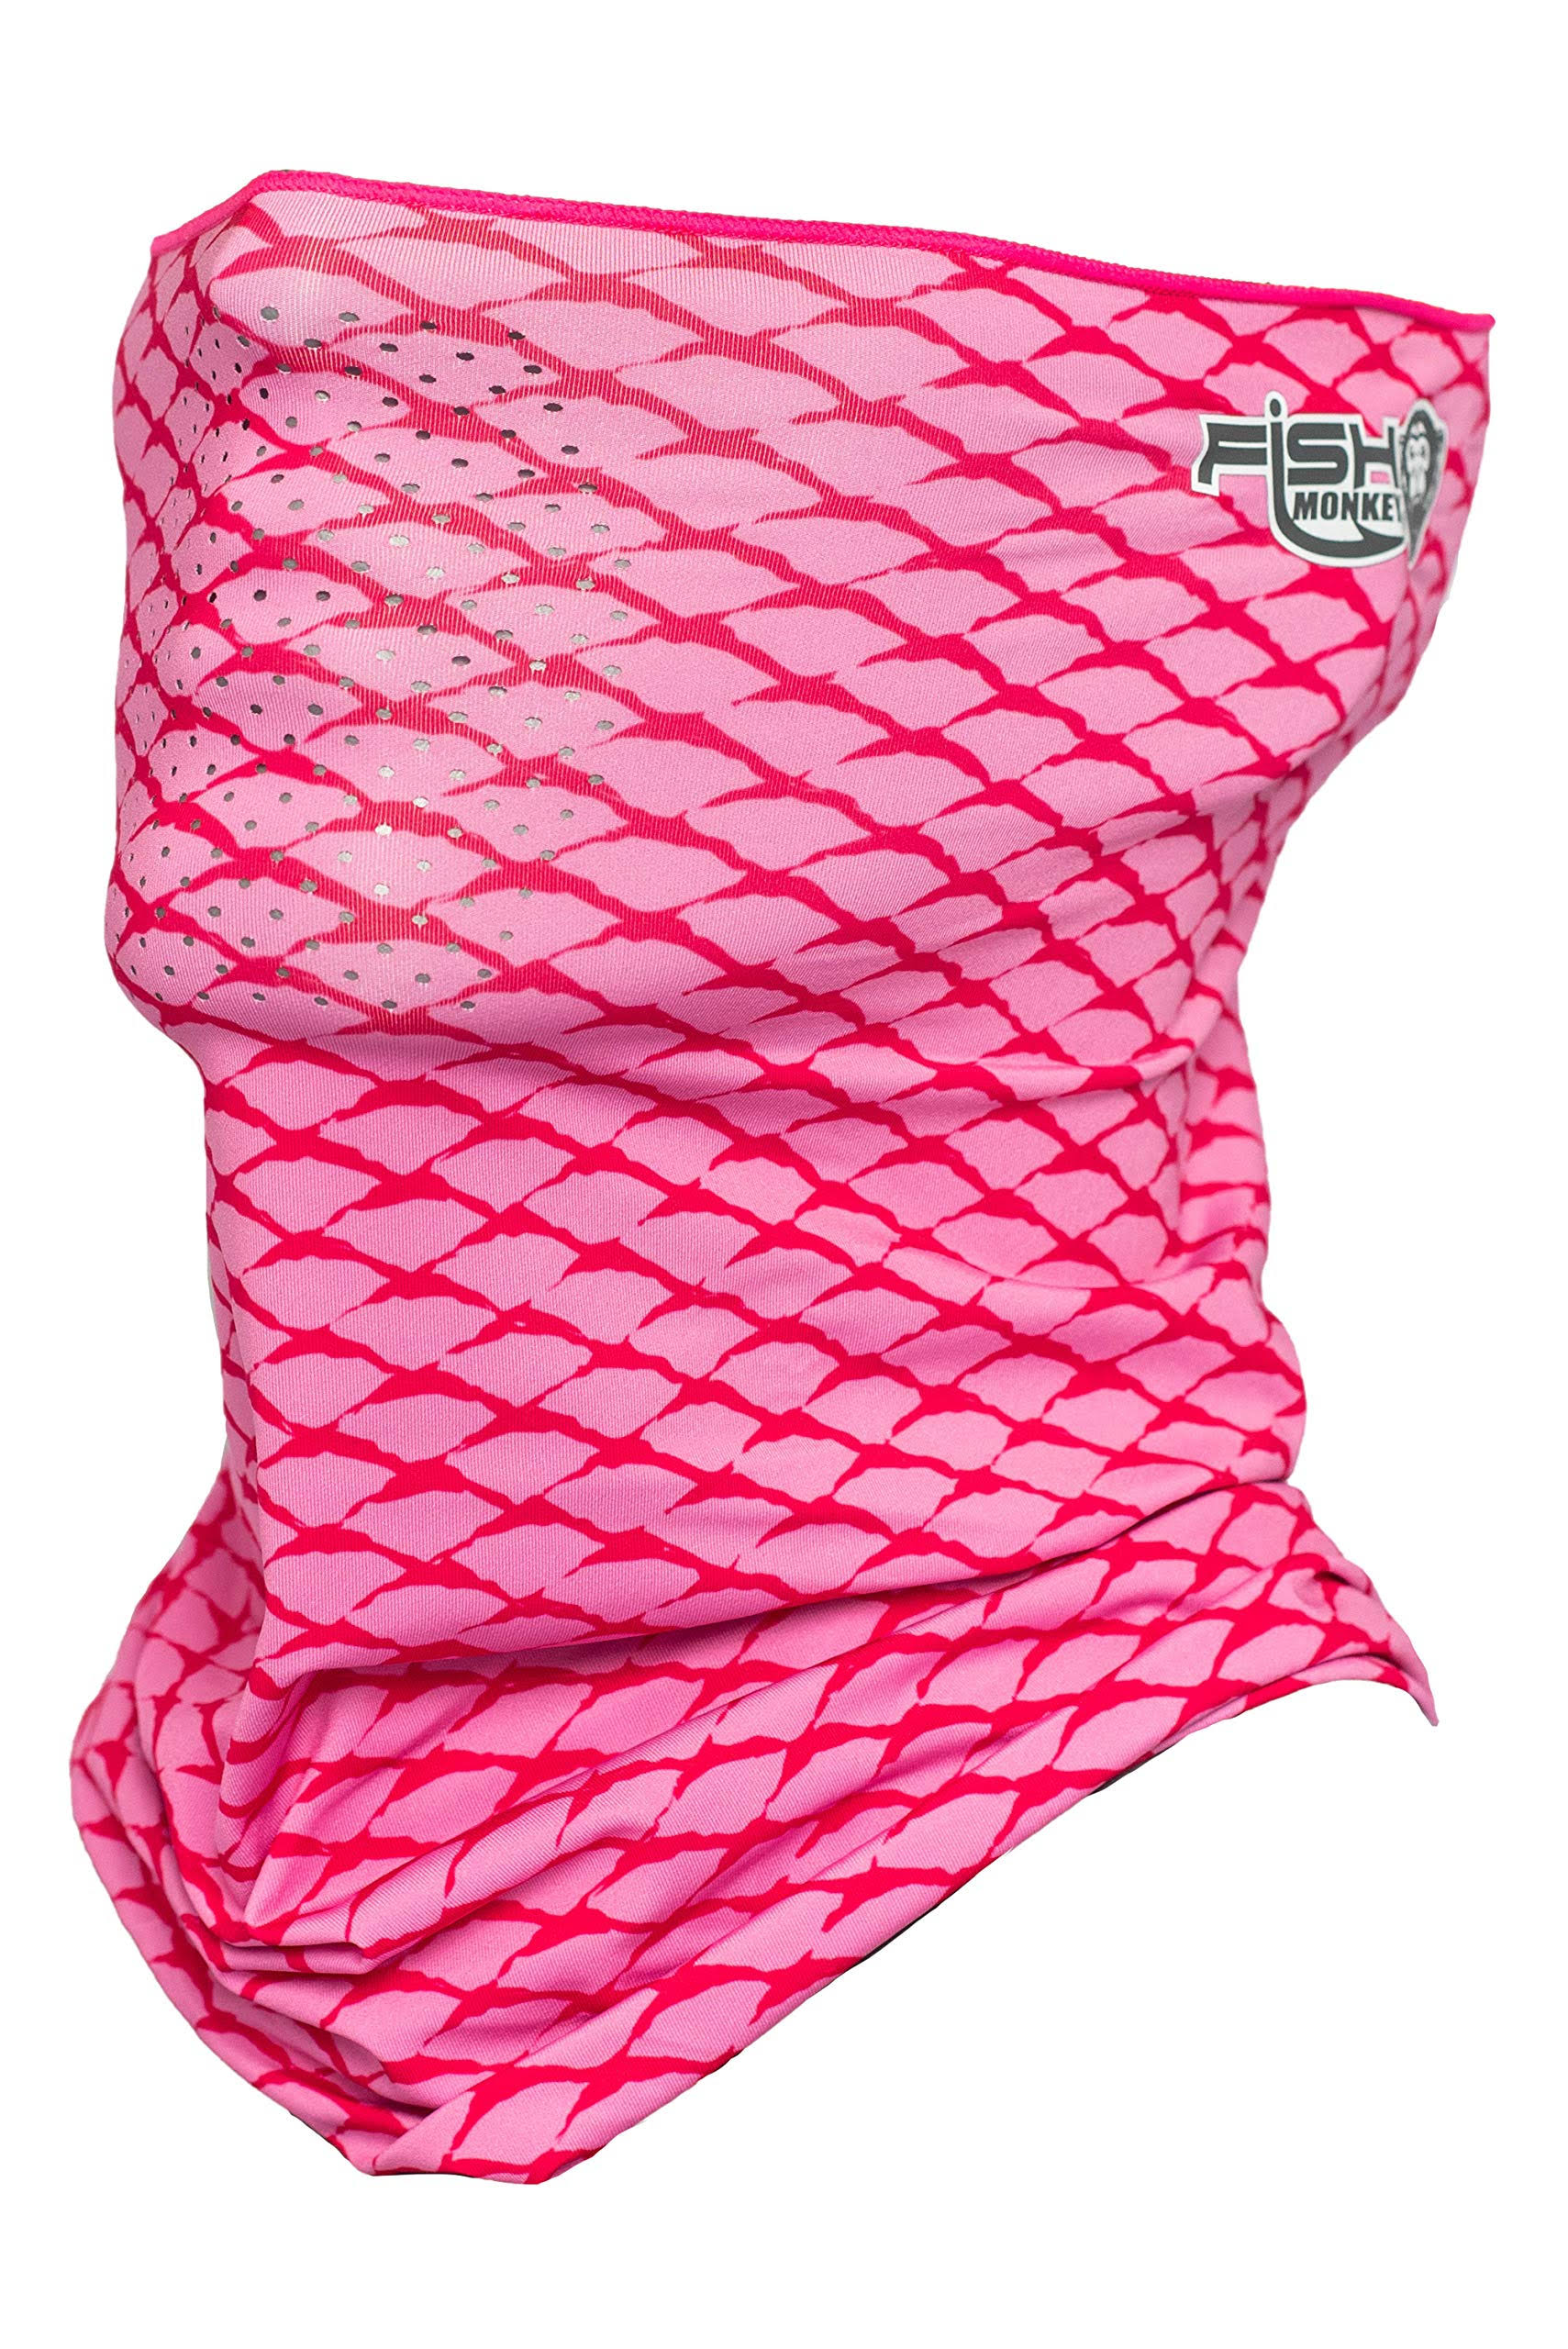 Fish Monkey FM40 Performance Face Guard - Pink Scales